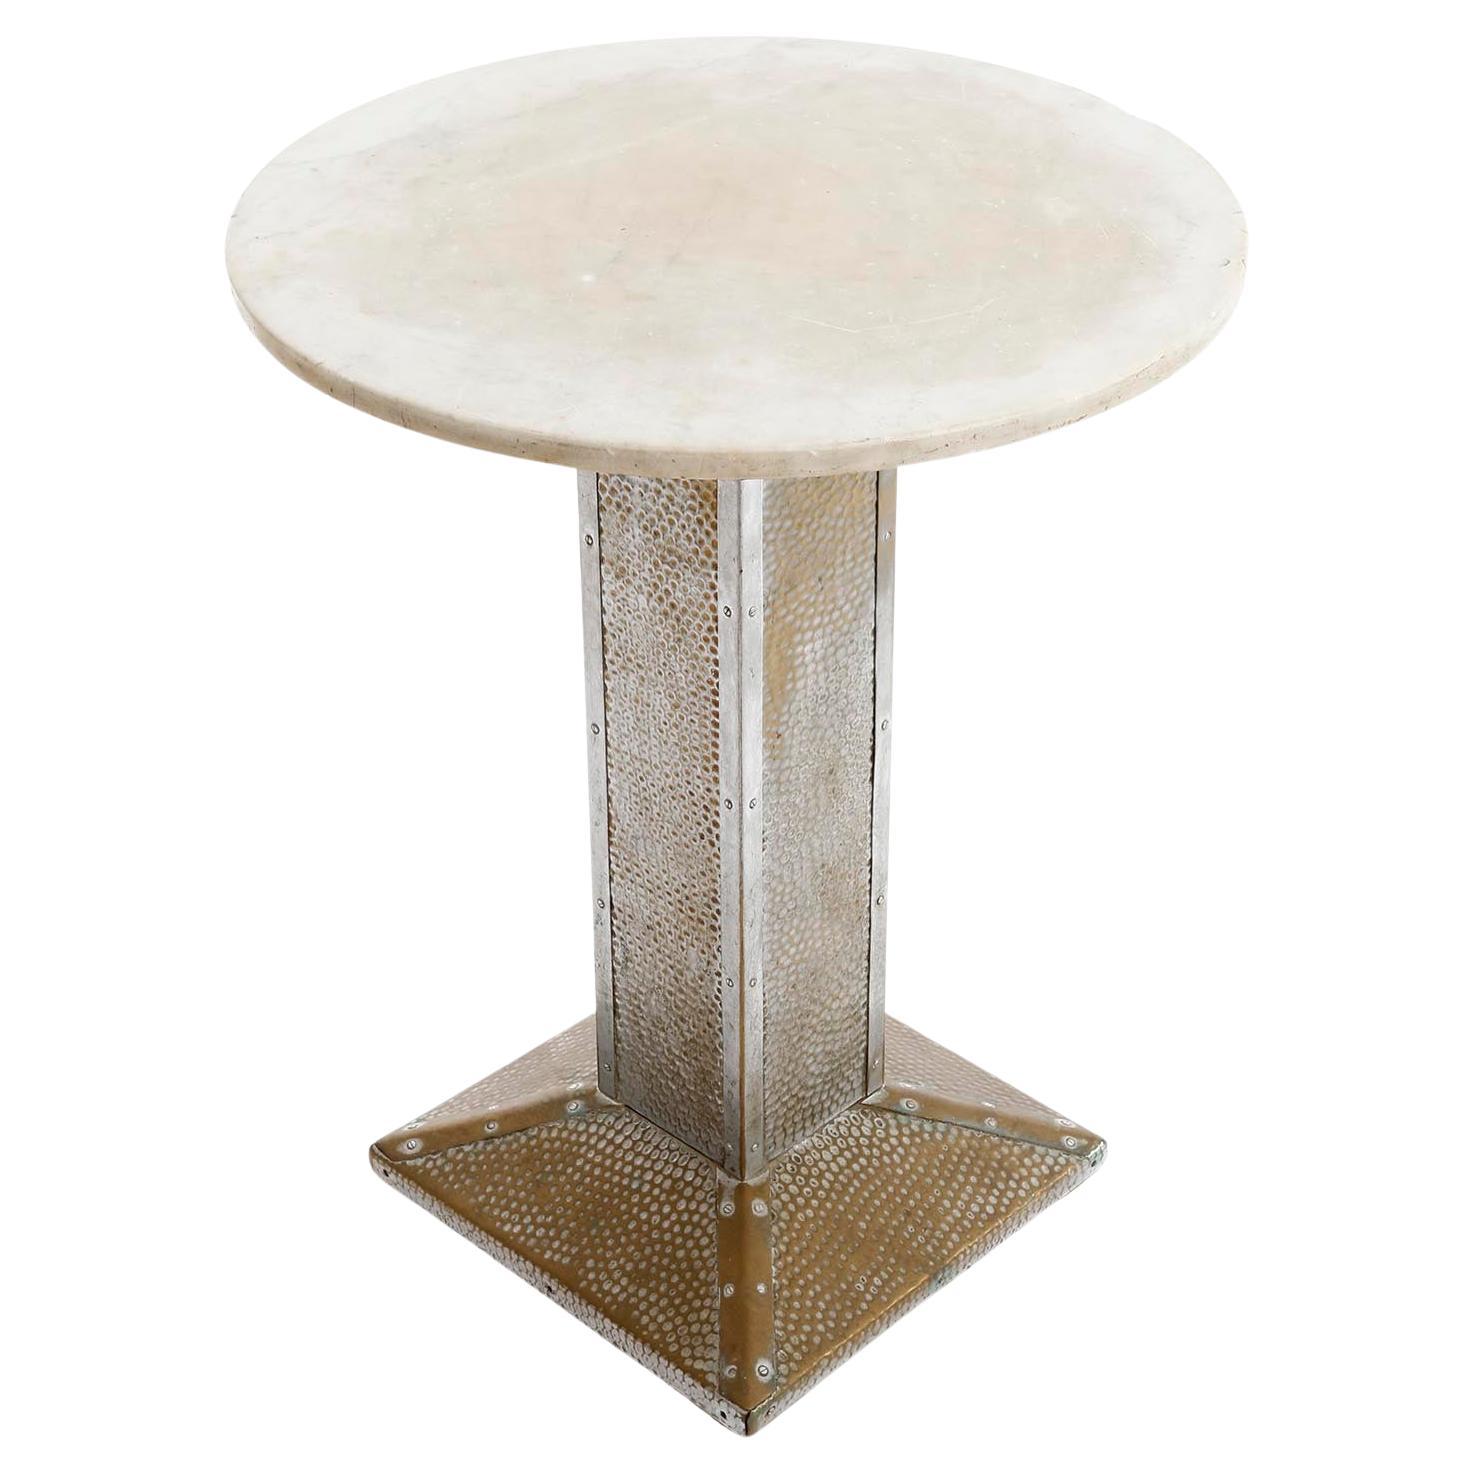 Art Deco Pedestal Table, Marble Patinated Hammered Nickeled Brass, Austria, 1910 For Sale